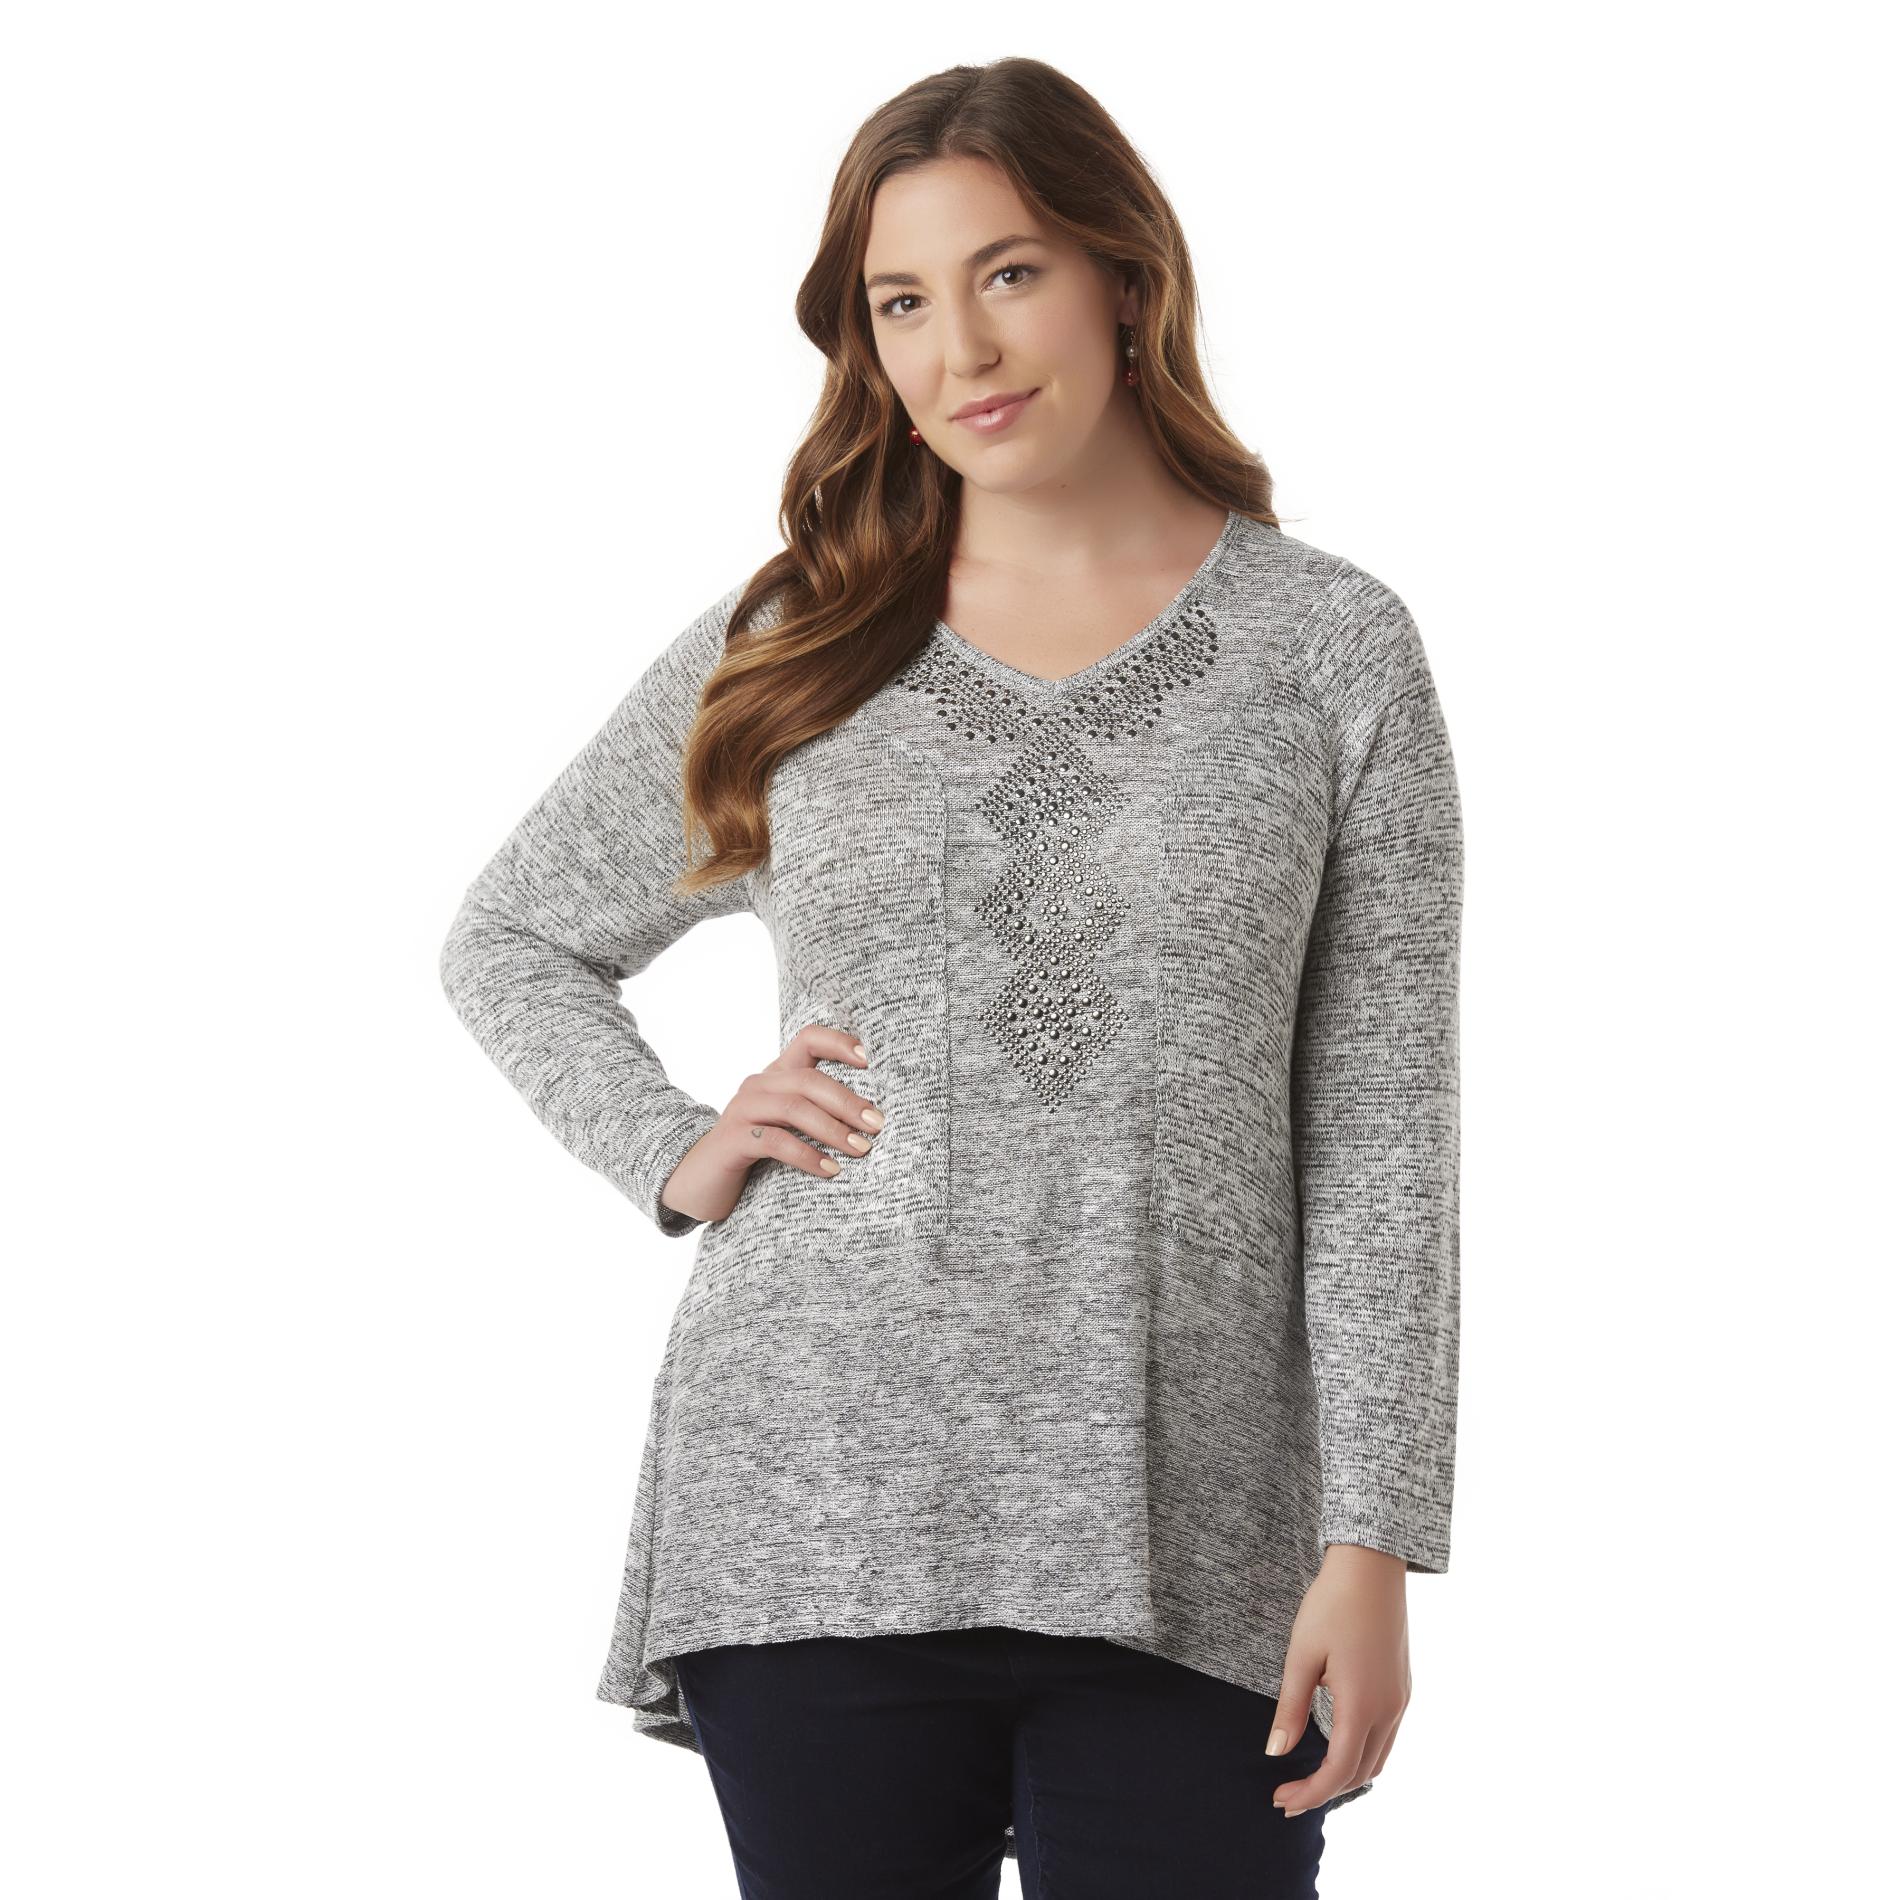 Live and Let Live Women's Plus Embellished Tunic Sweater